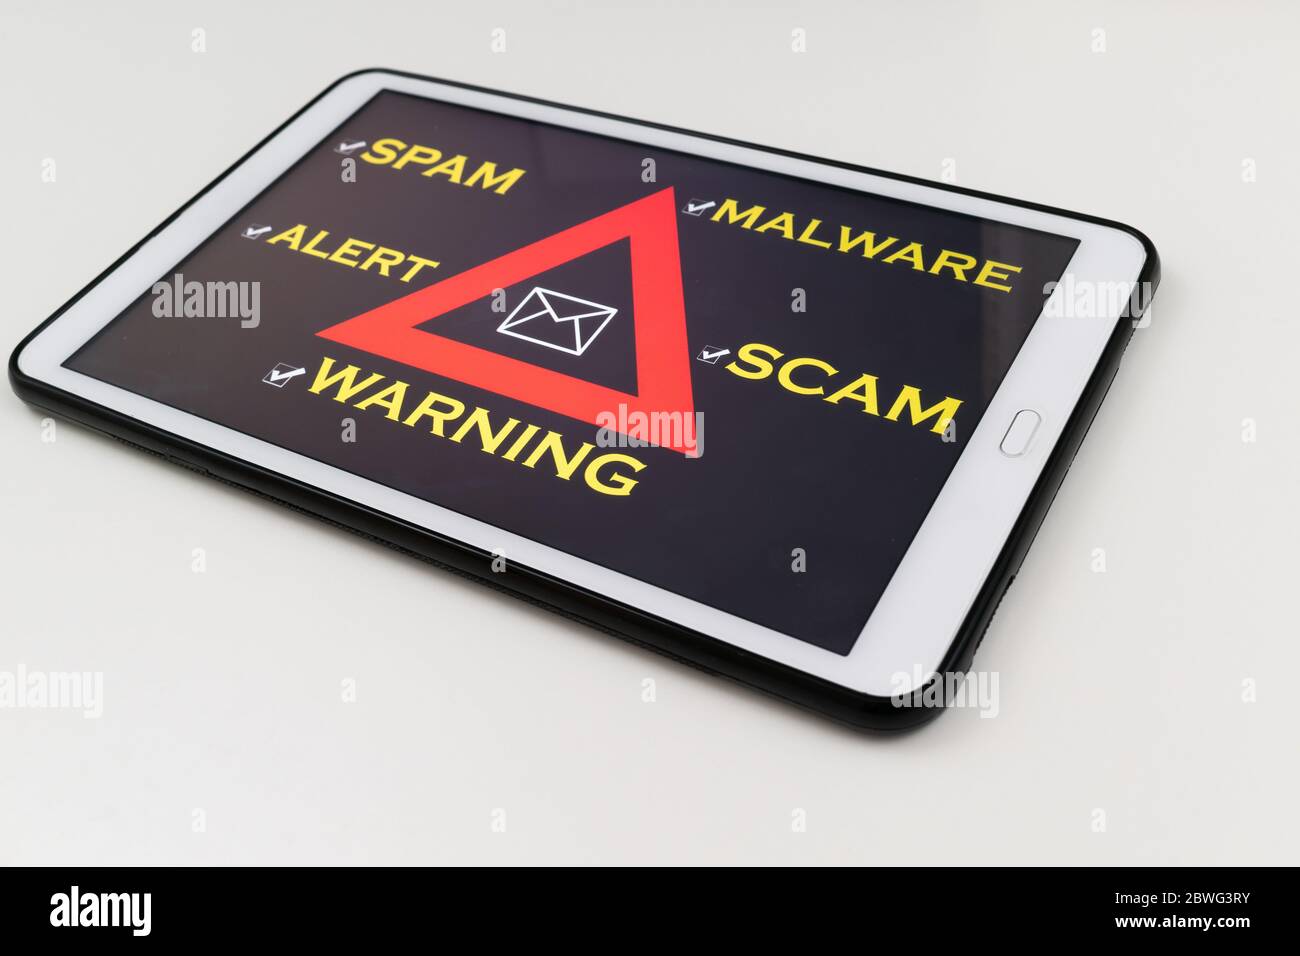 internet spam scam security Stock Photo